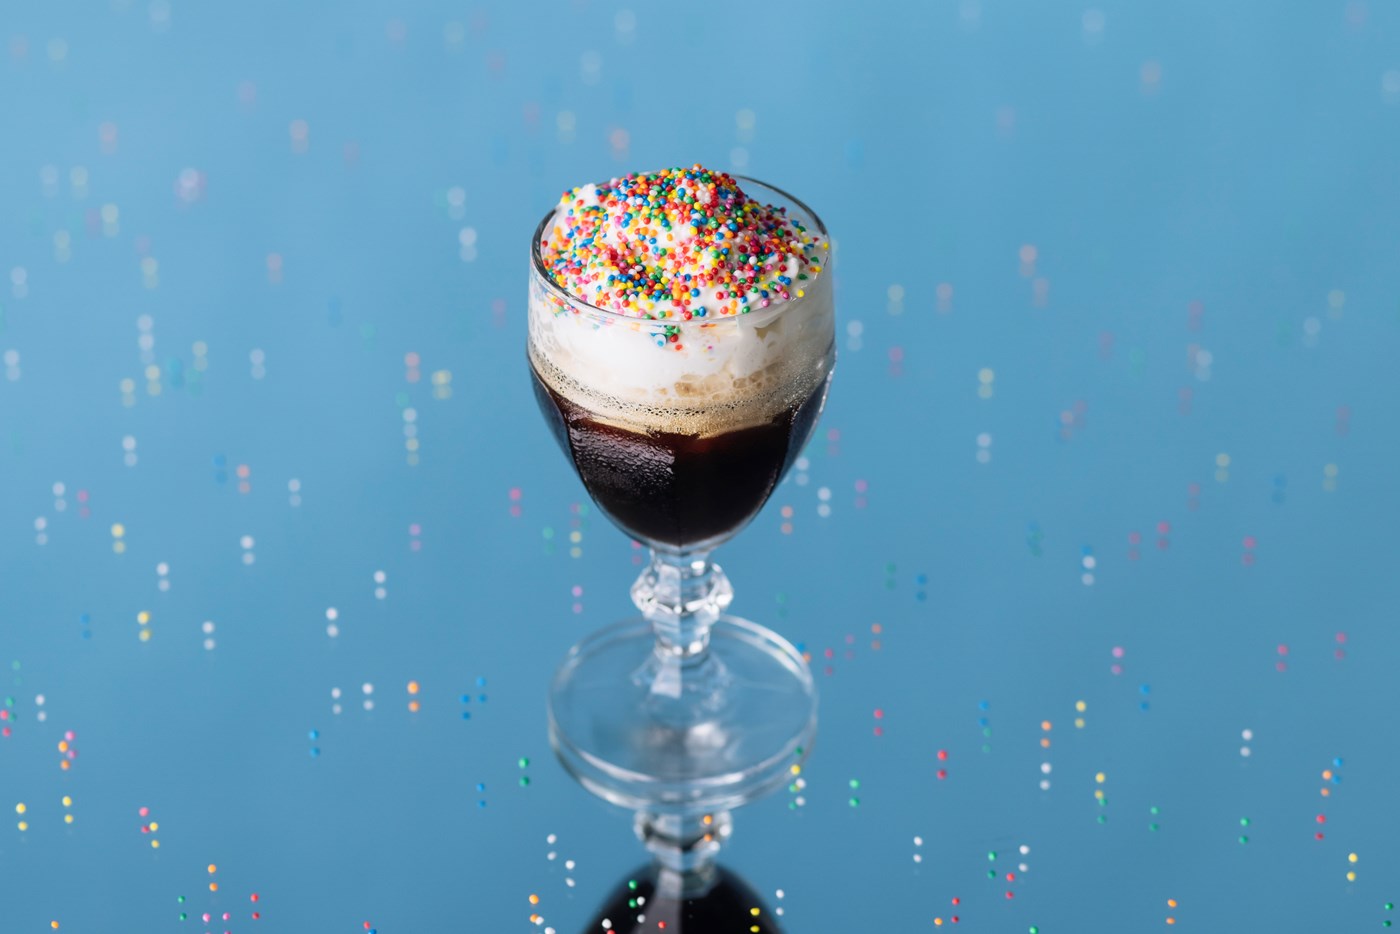 About Time's Boozy Iced Coffee Slushie